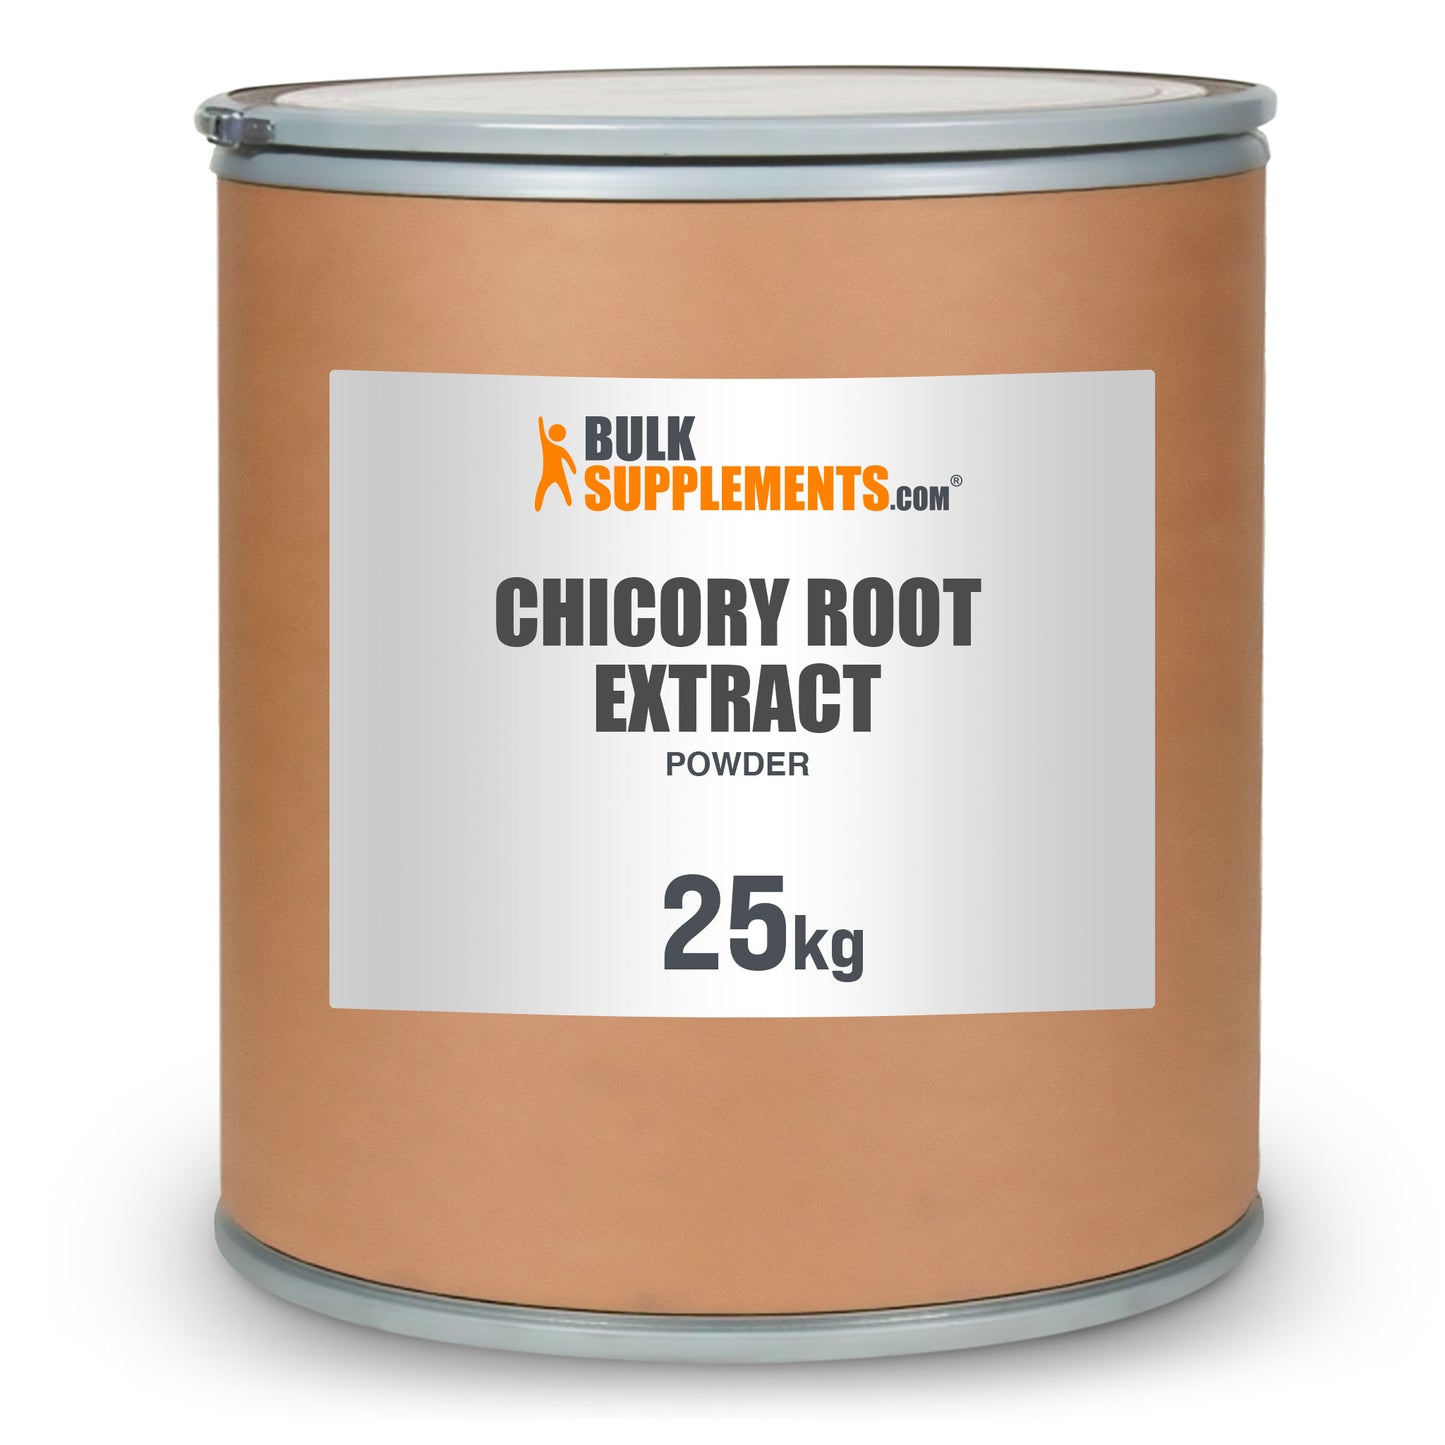 Chicory Root Extract powder 25kg barrel